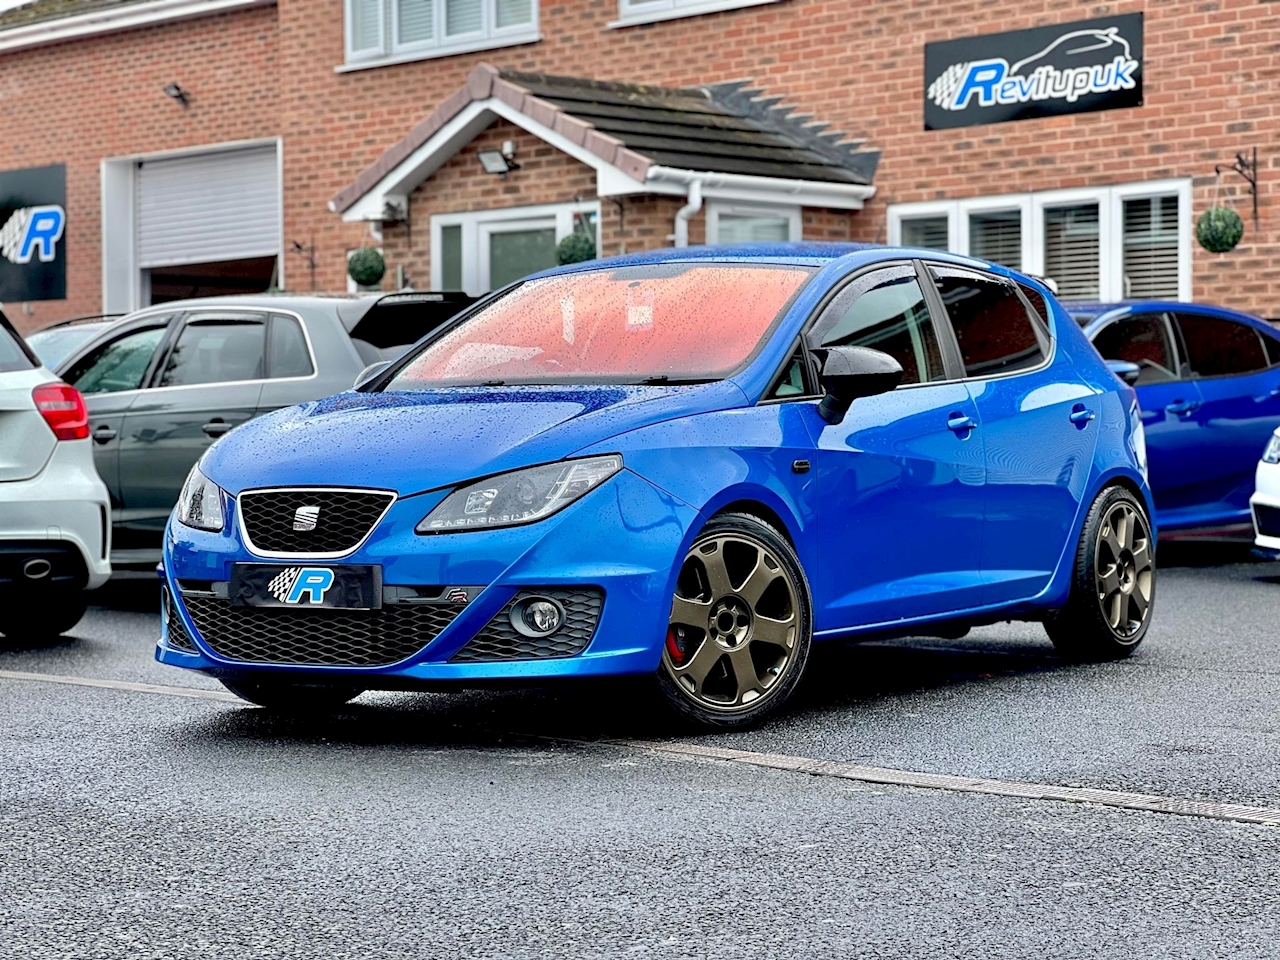 seat ibiza 6j used – Search for your used car on the parking